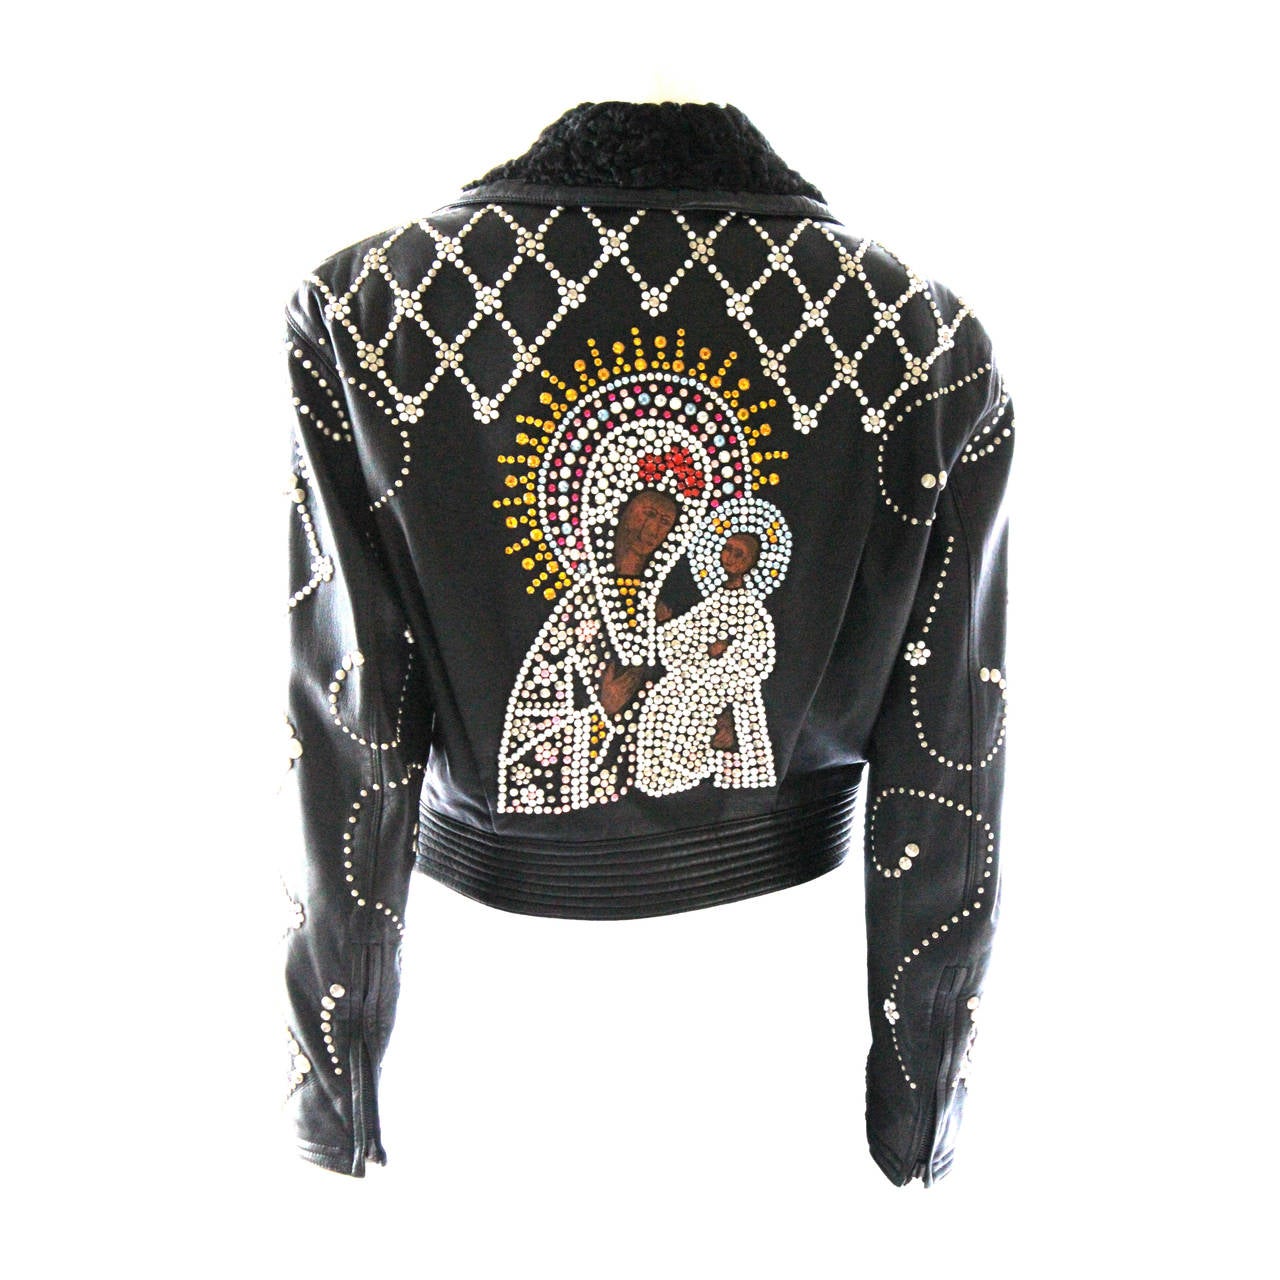 Gianni Versace Couture 1991 Madonna and Child Runway Leather Jacket